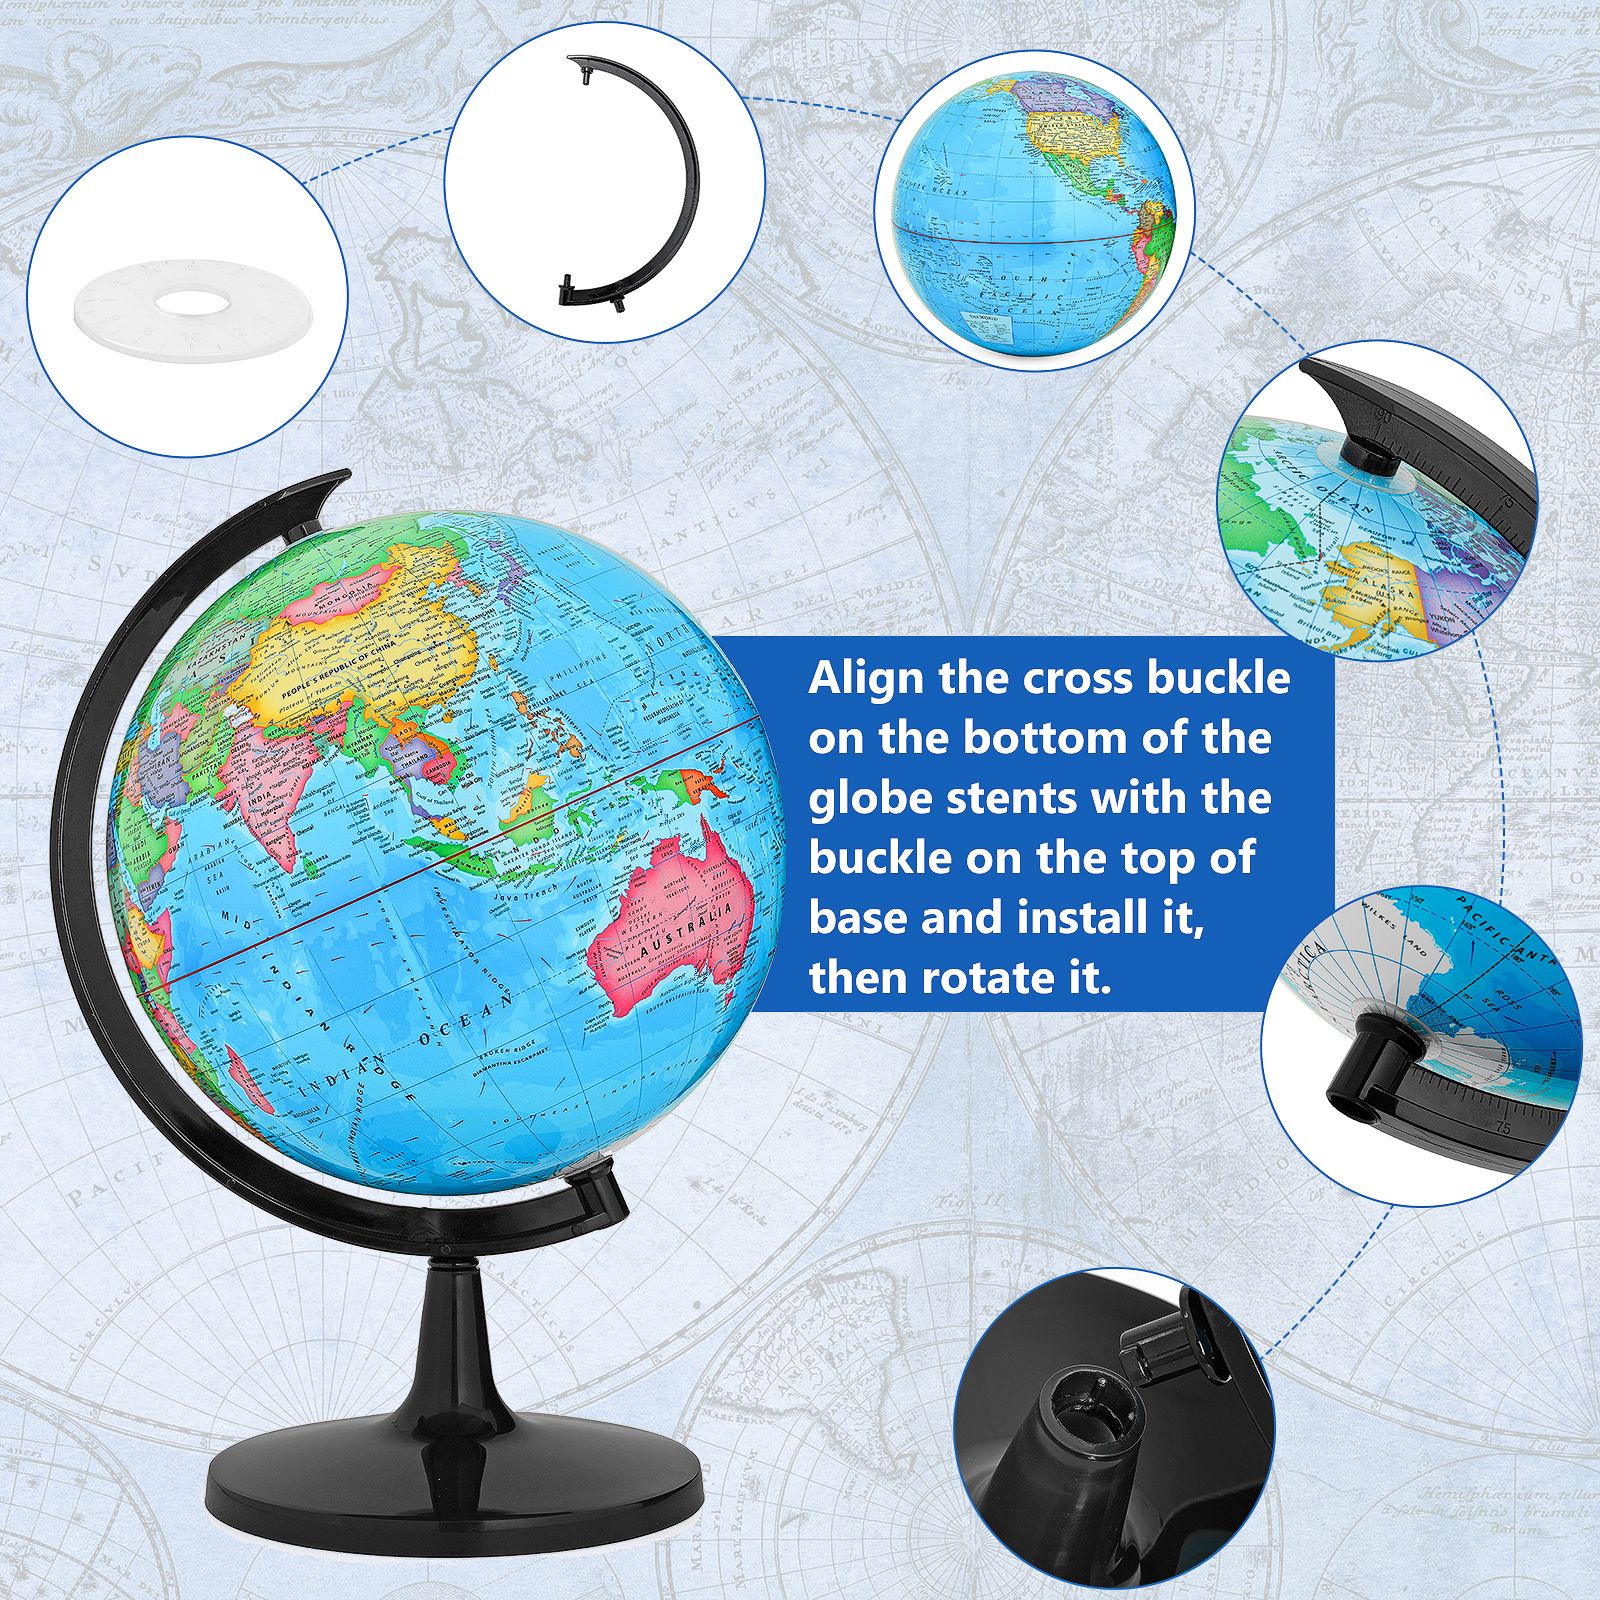 BSHAPPLUS 13" World Globe for Kids, Rotating Globes of the World with Stand, Geography Educational Toy, Home Office, Shelf Desktop, Decor Gift - image 5 of 7